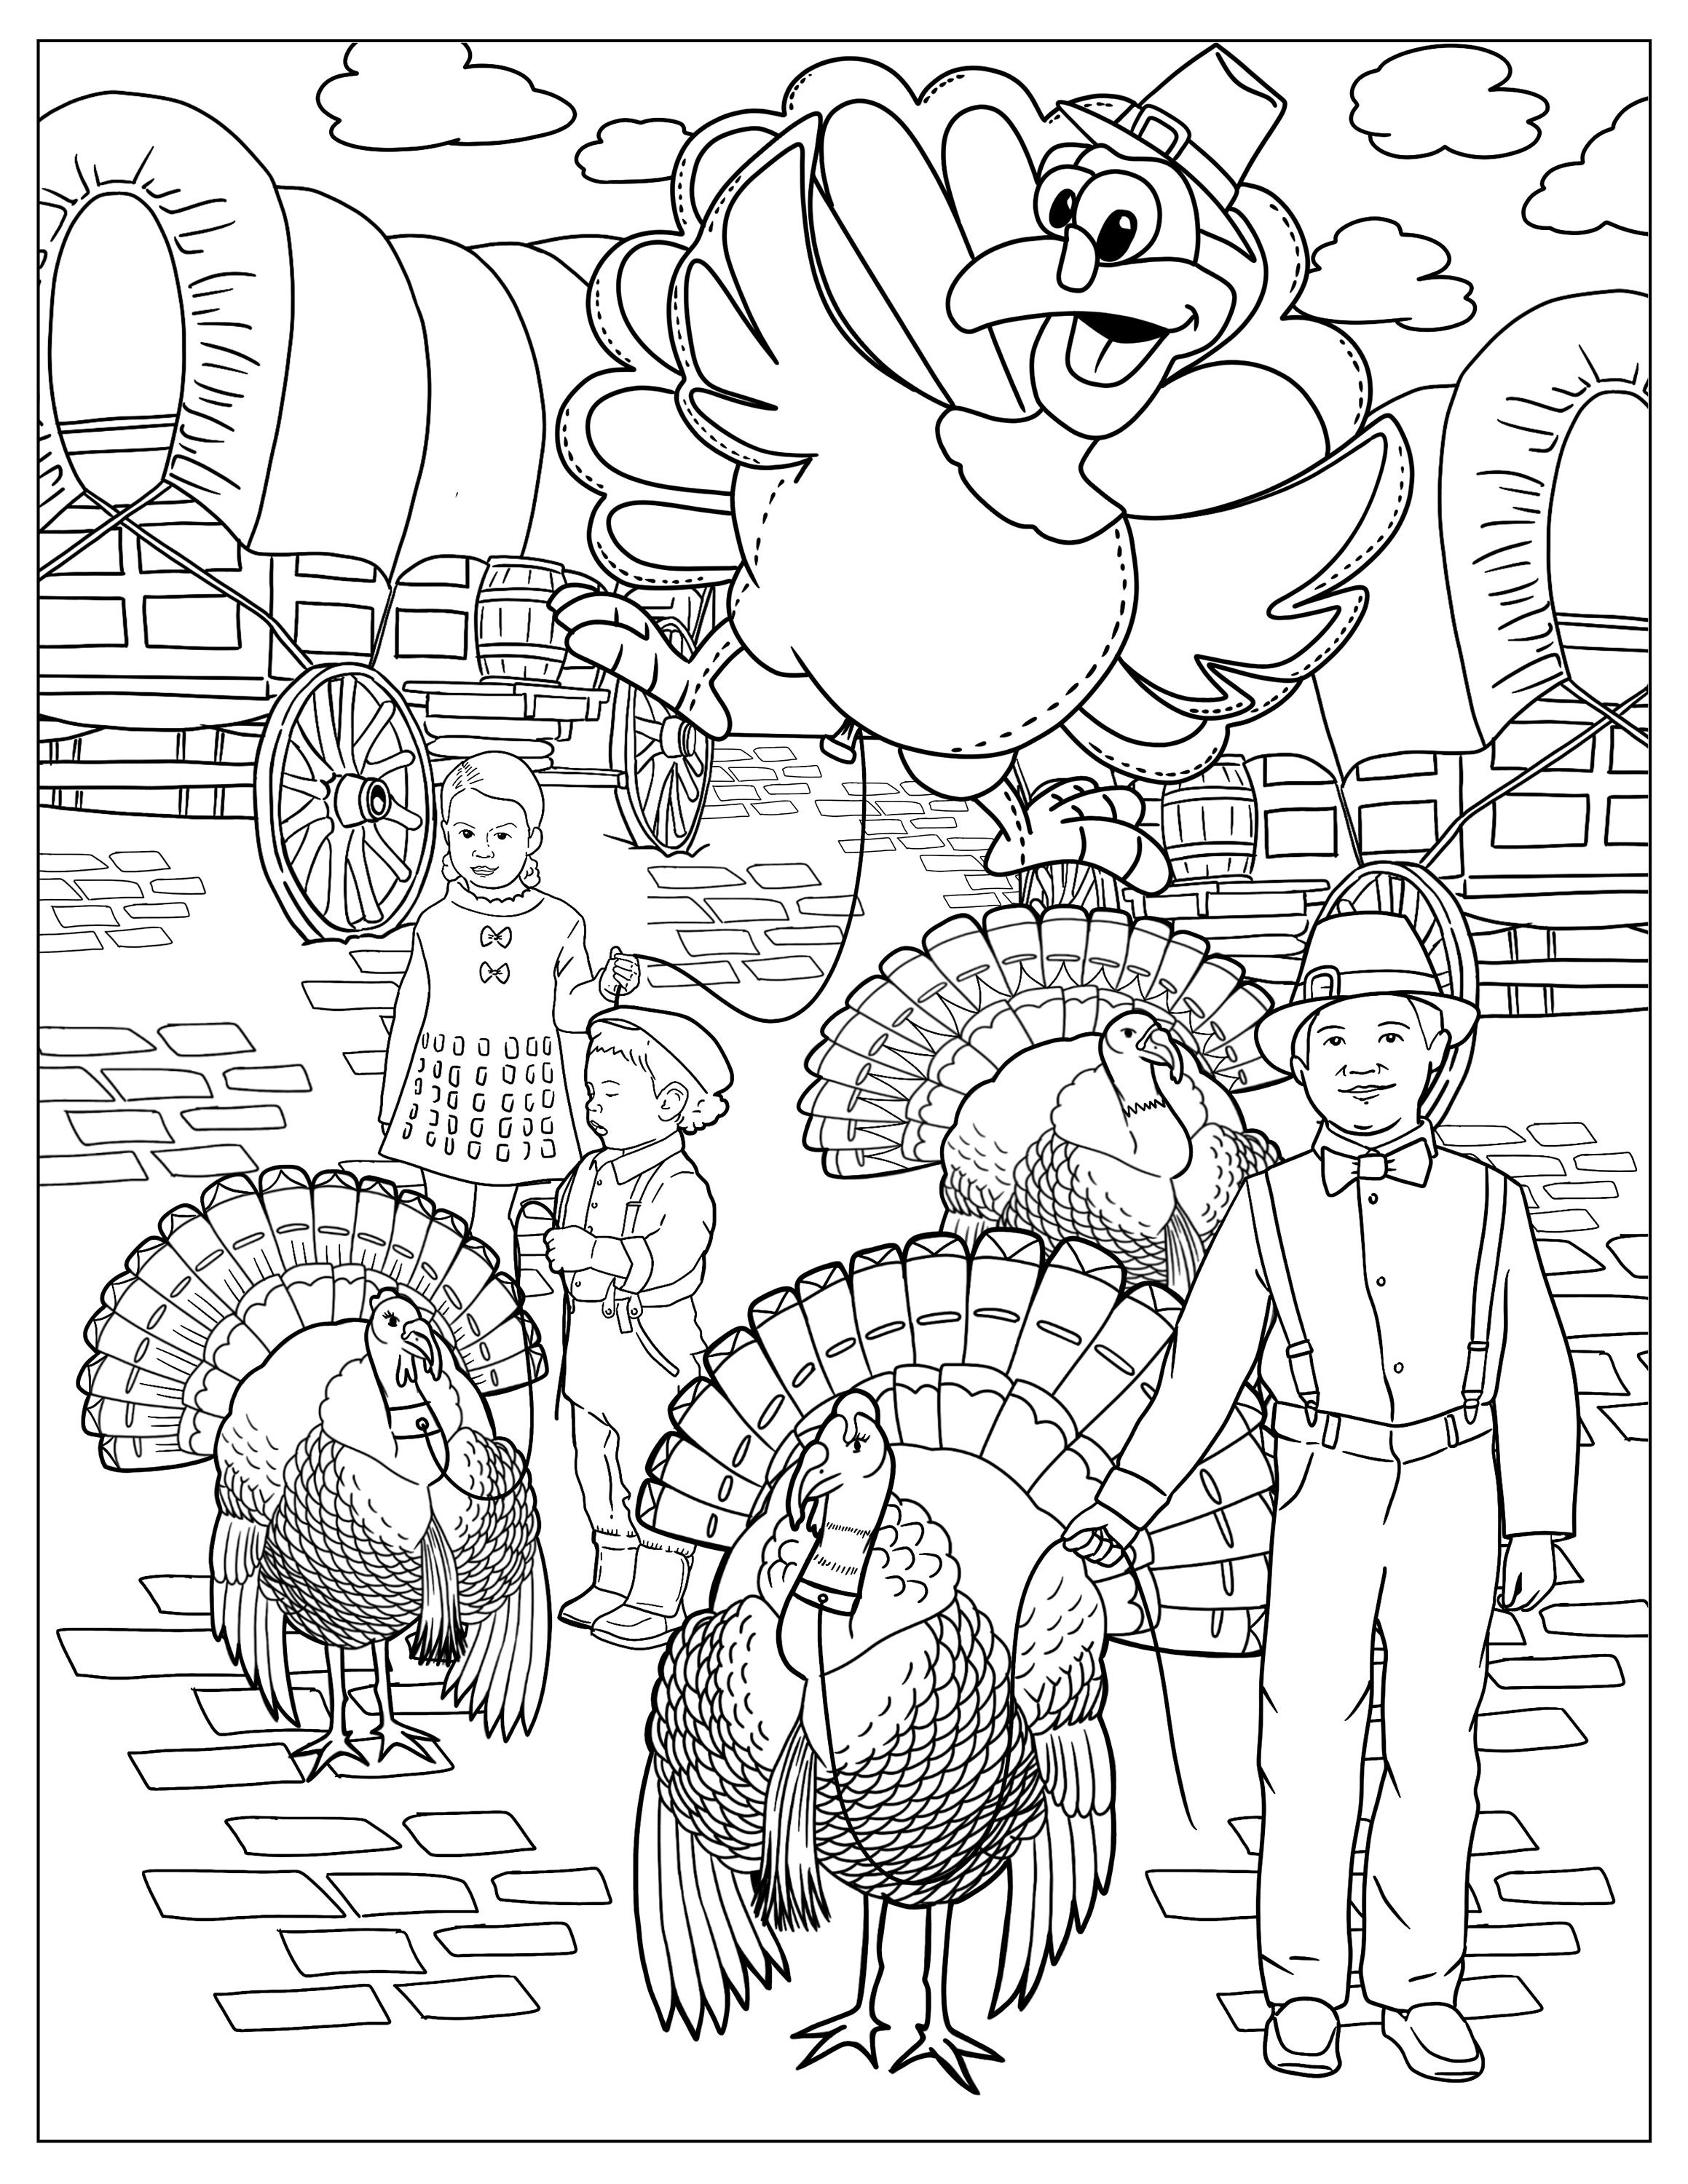 25 Free Printable Coloring Pages for Adults - Parade